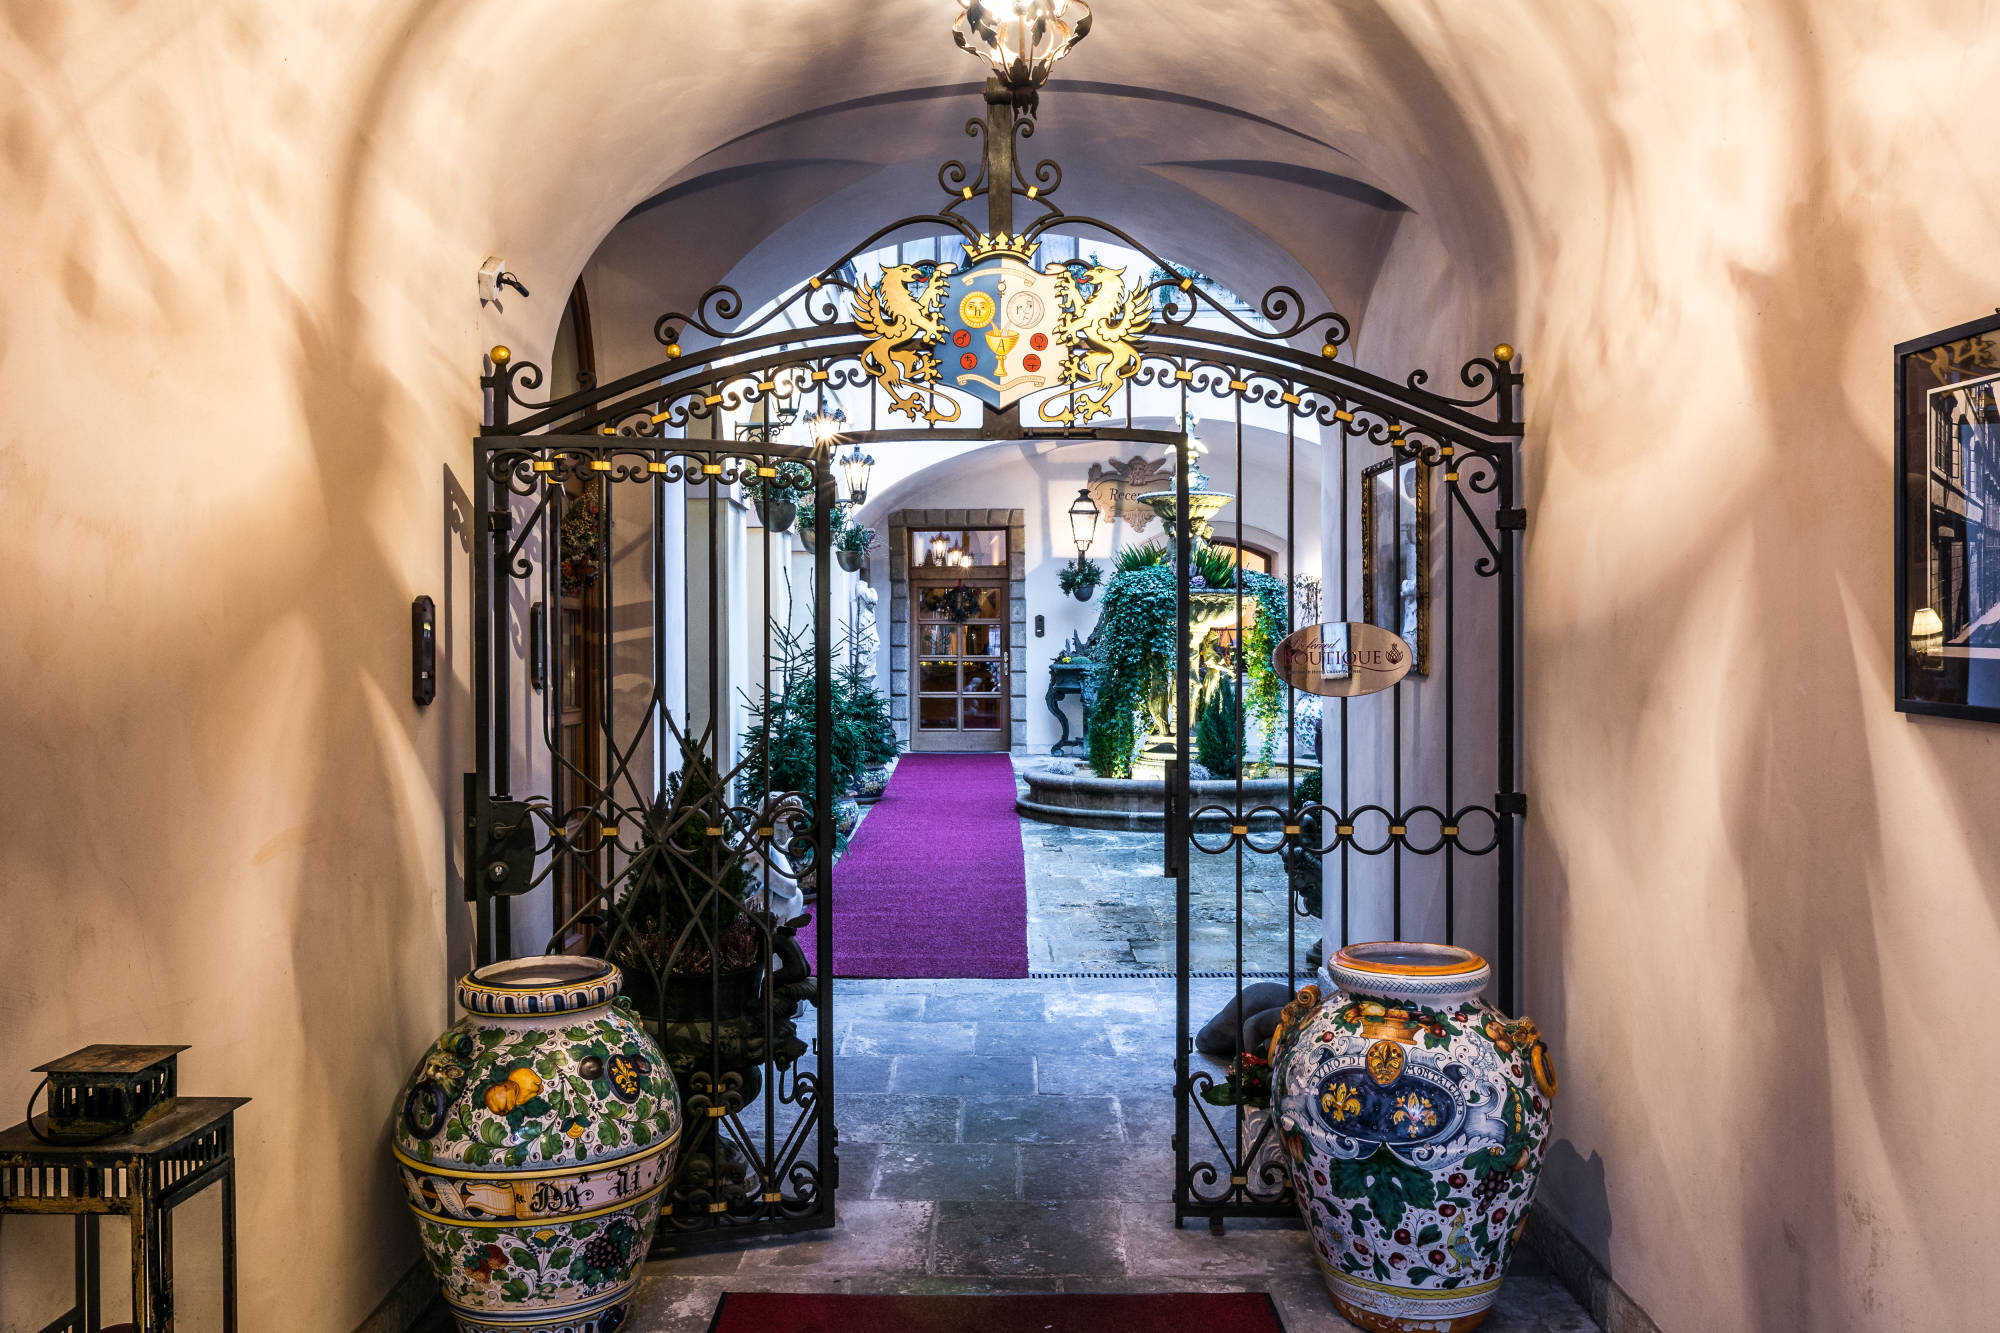 Entrance to the Alchymist Grand Hotel and Spa